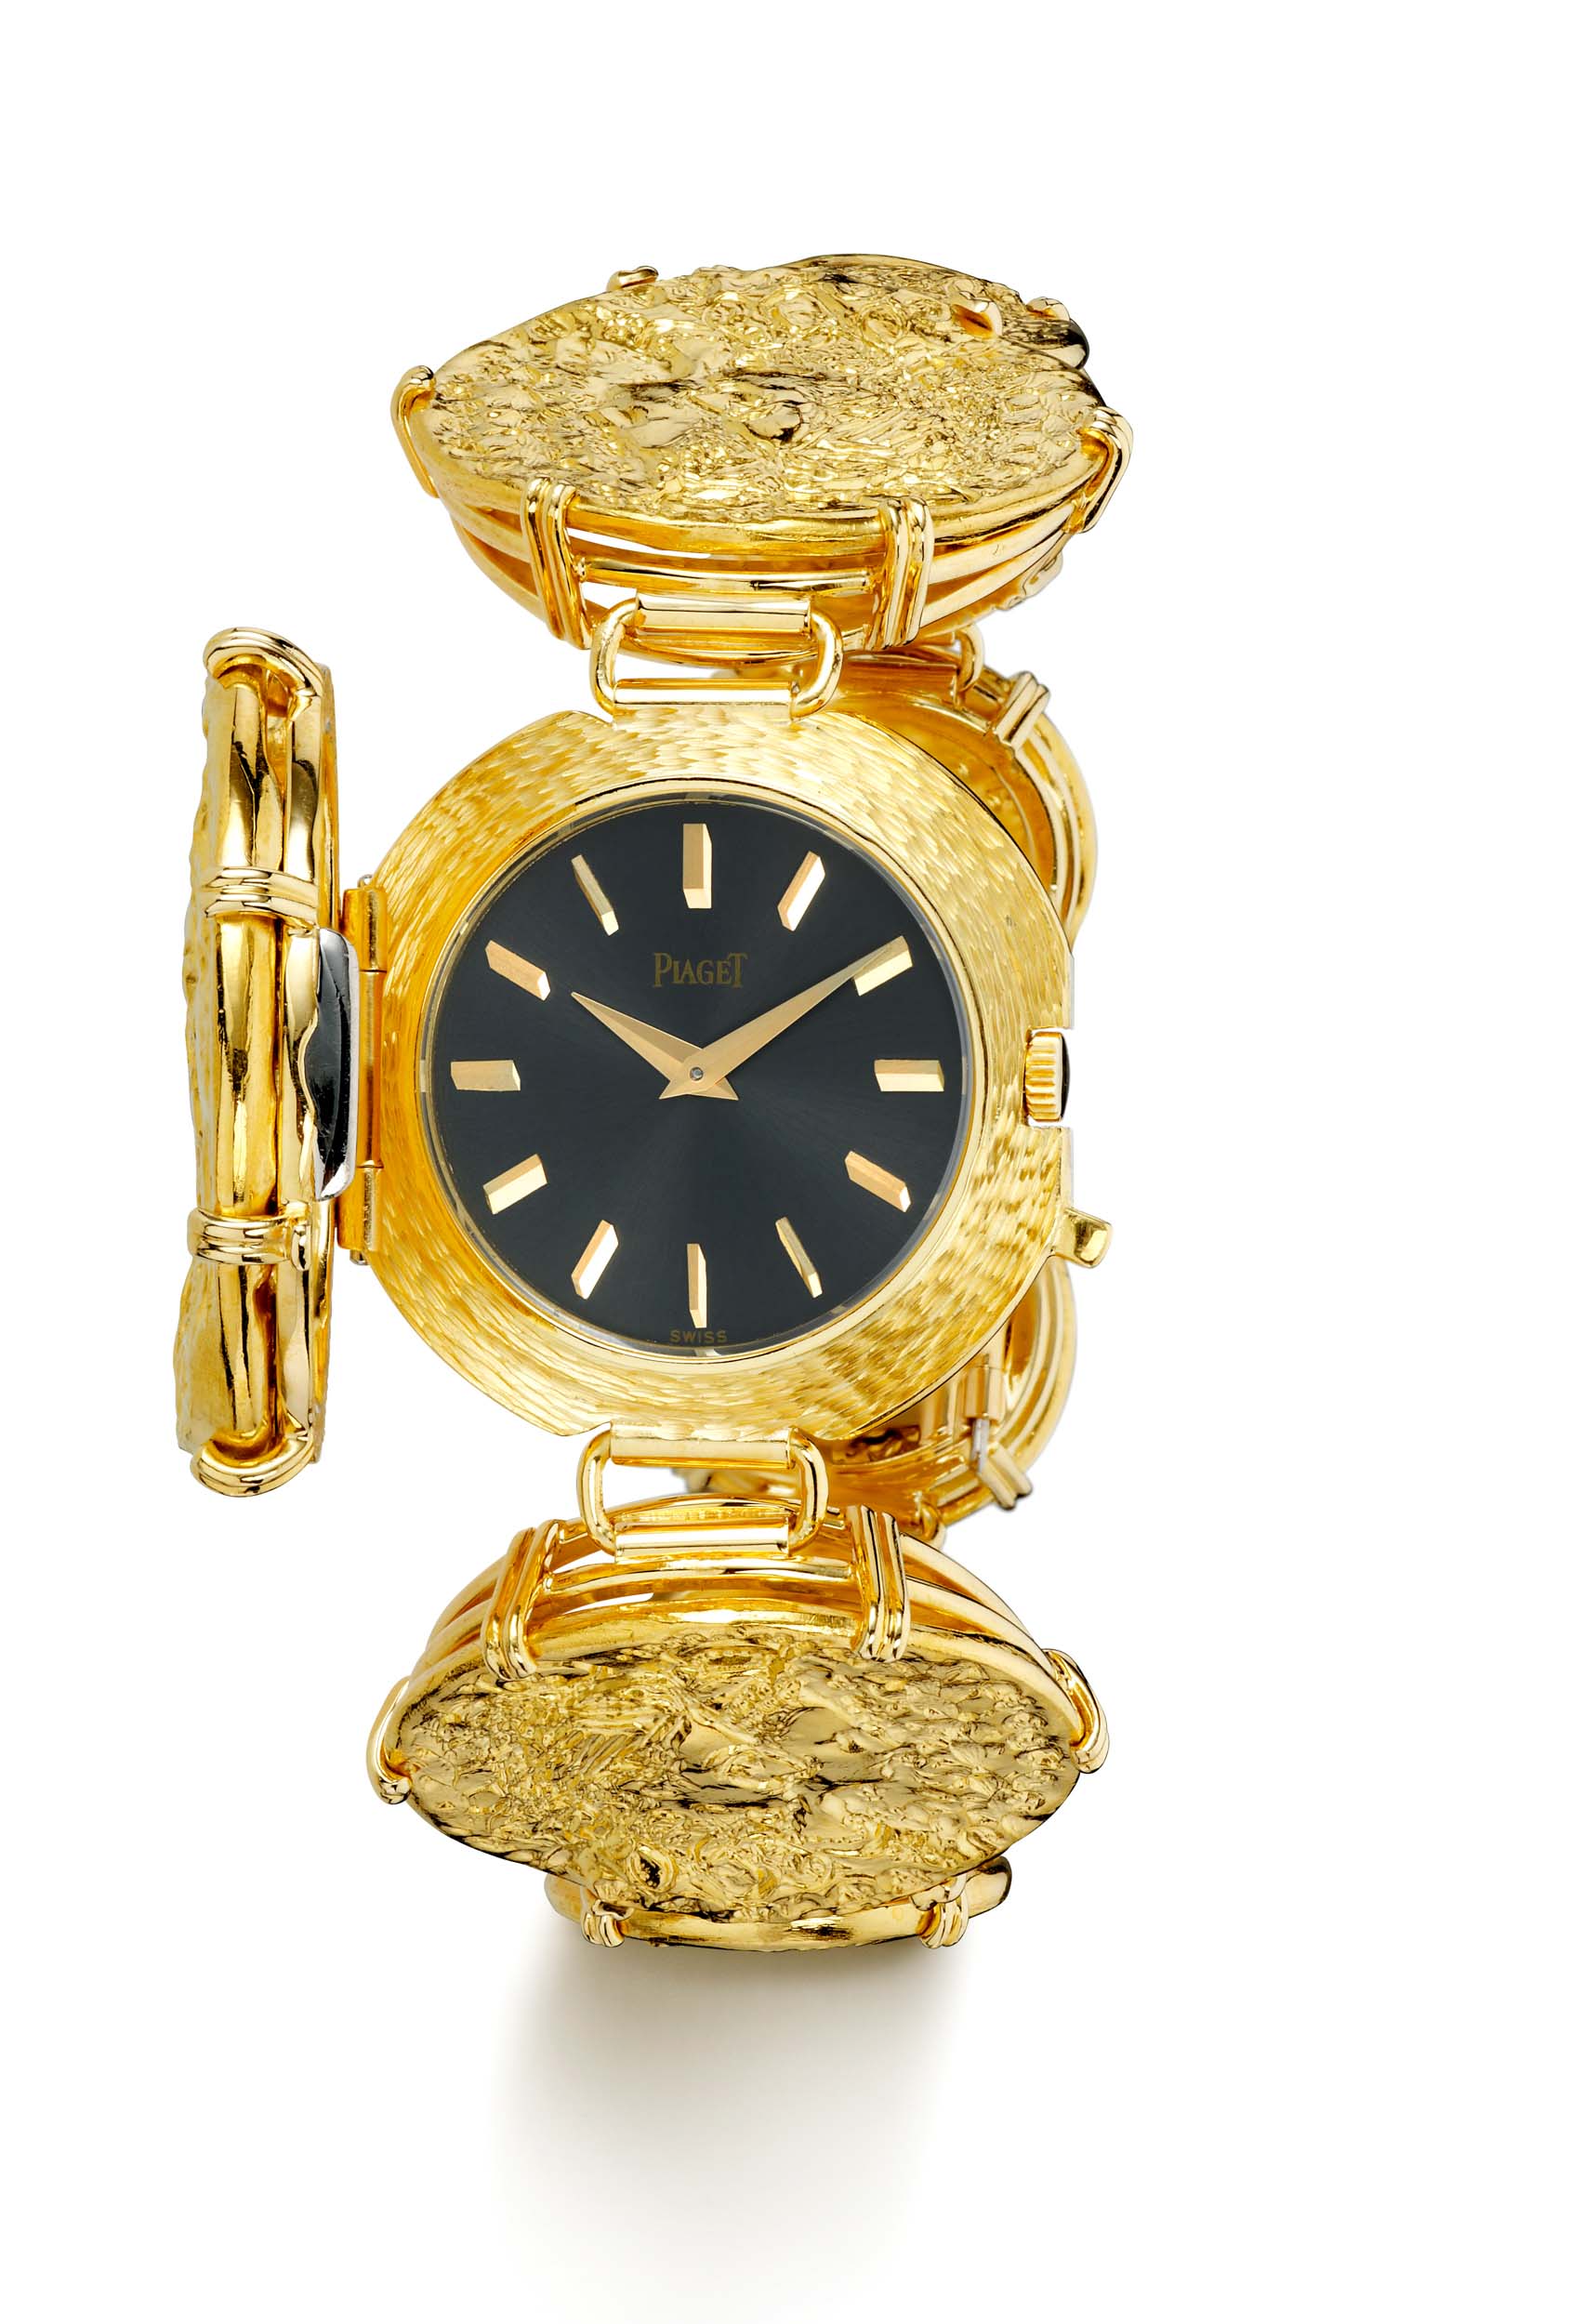 Travel back in time with Piaget 11